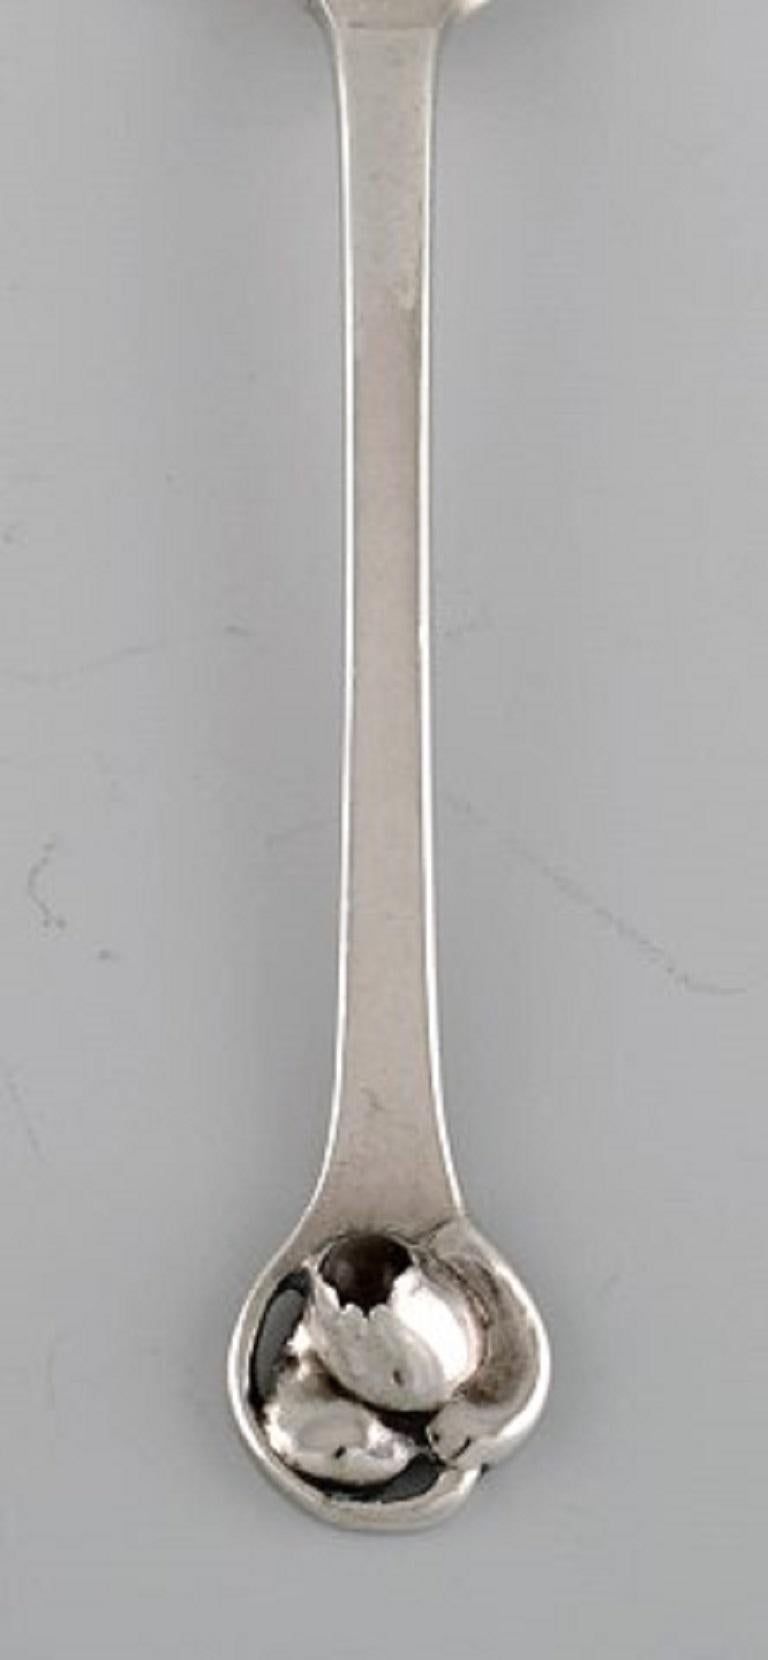 Evald Nielsen teaspoon in sterling silver. 1920s.
Measure: Length: 11.2 cm.
Stamped.
In excellent condition.
Our skilled Georg Jensen silver / jeweler can polish all silver and gold so that it appears as new. The price is very reasonable.